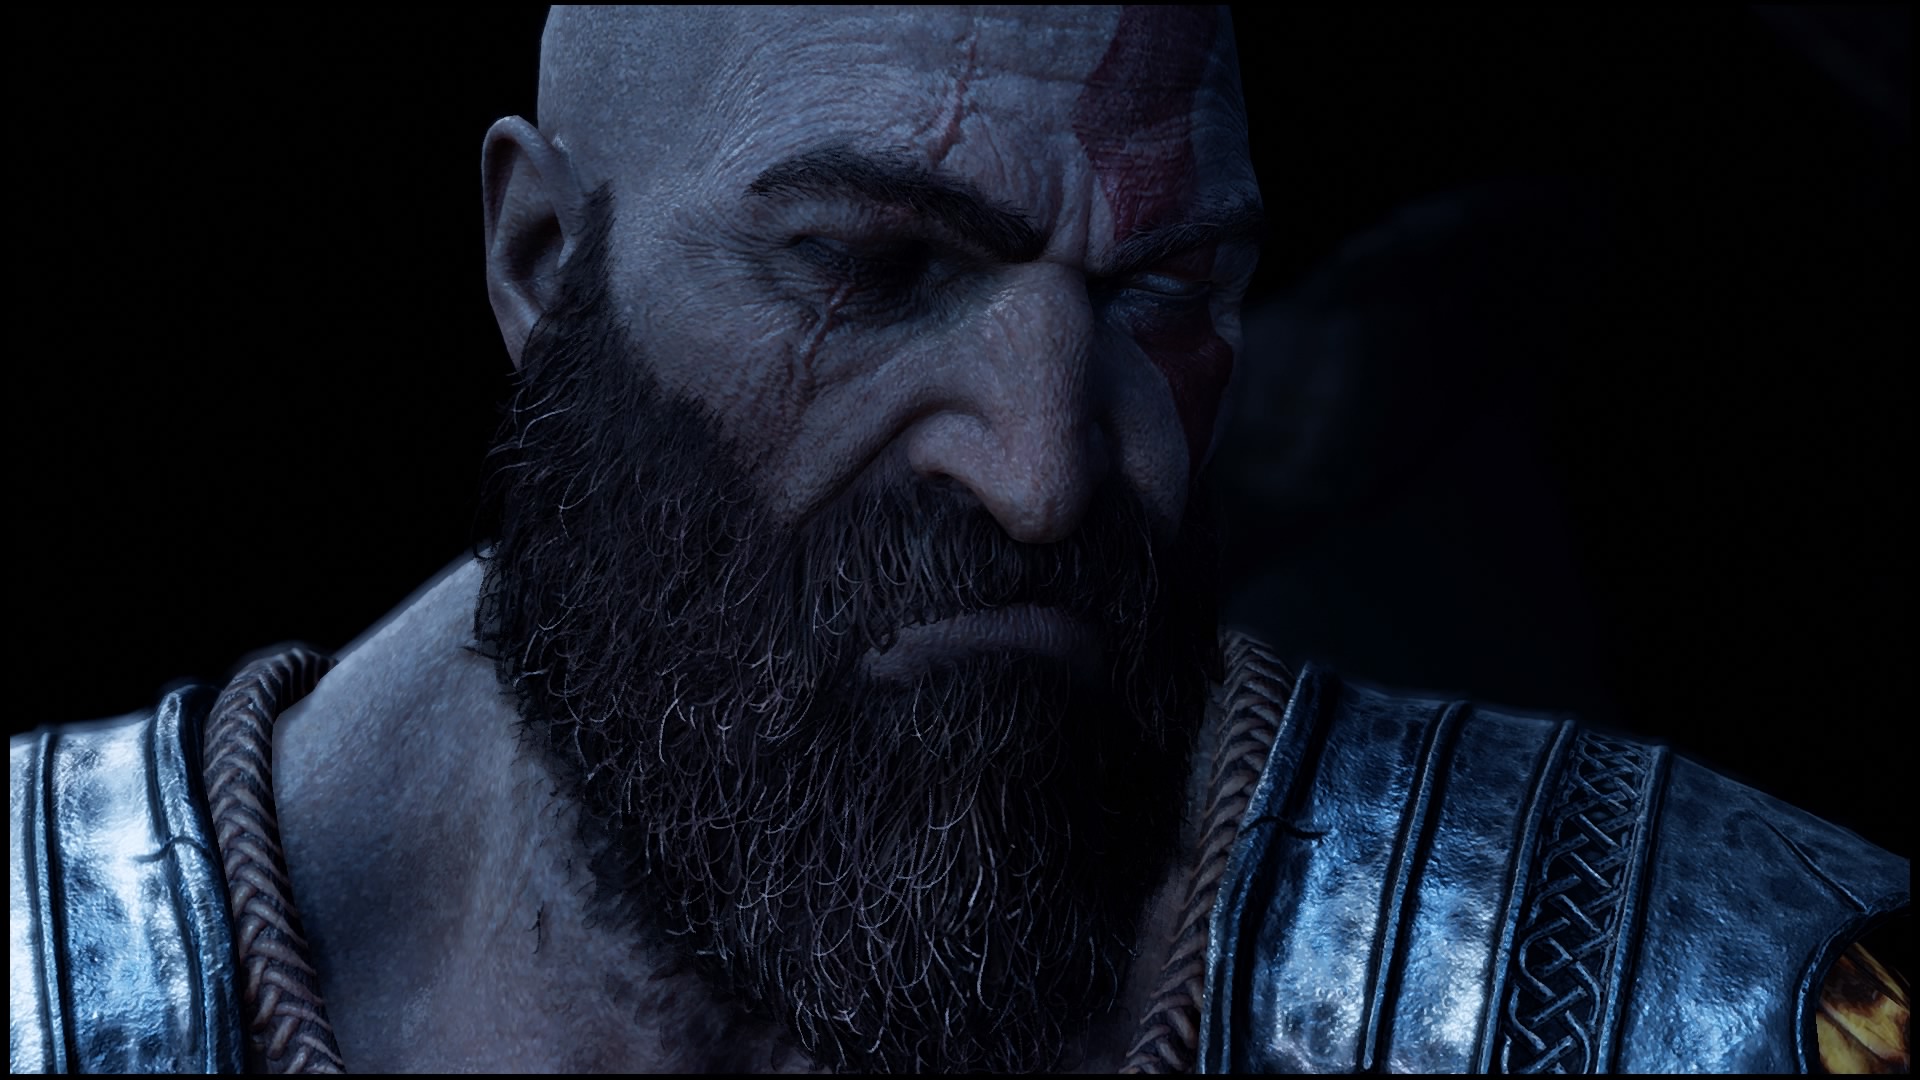 General 1920x1080 God of War God of War (2018) Kratos PlayStation 4 video games video game characters